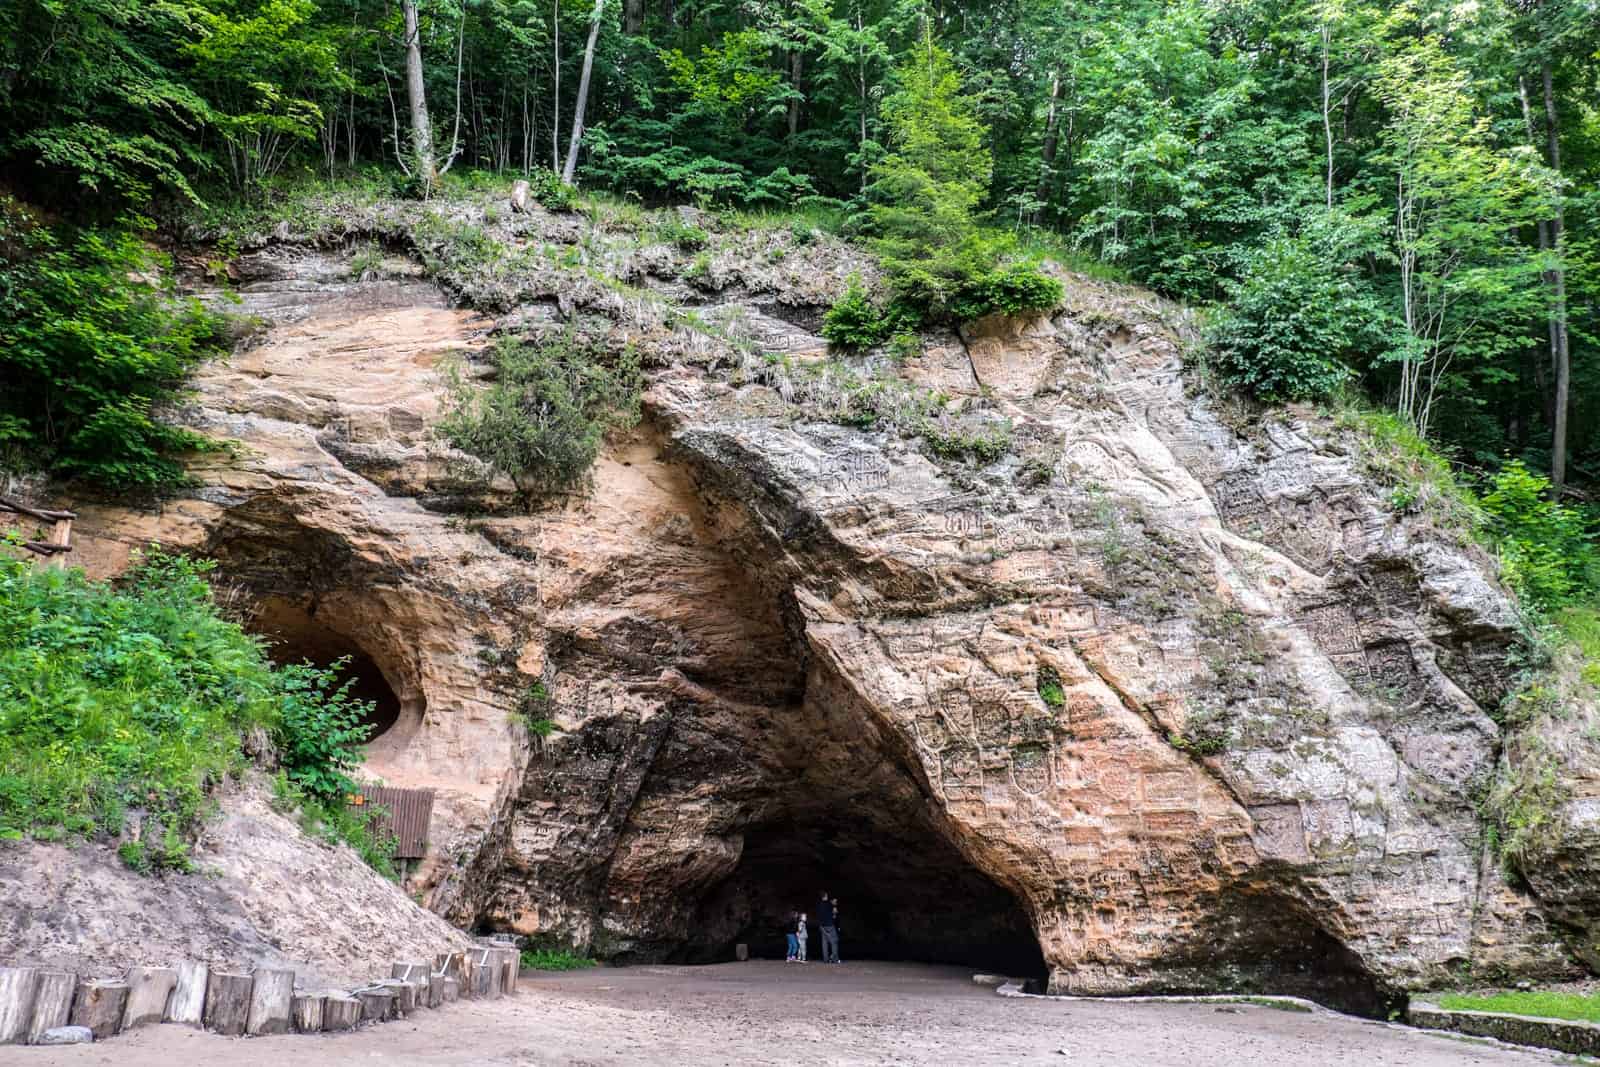 Gutman’s Cave filled with inscriptions found in Sigulda, Latvia